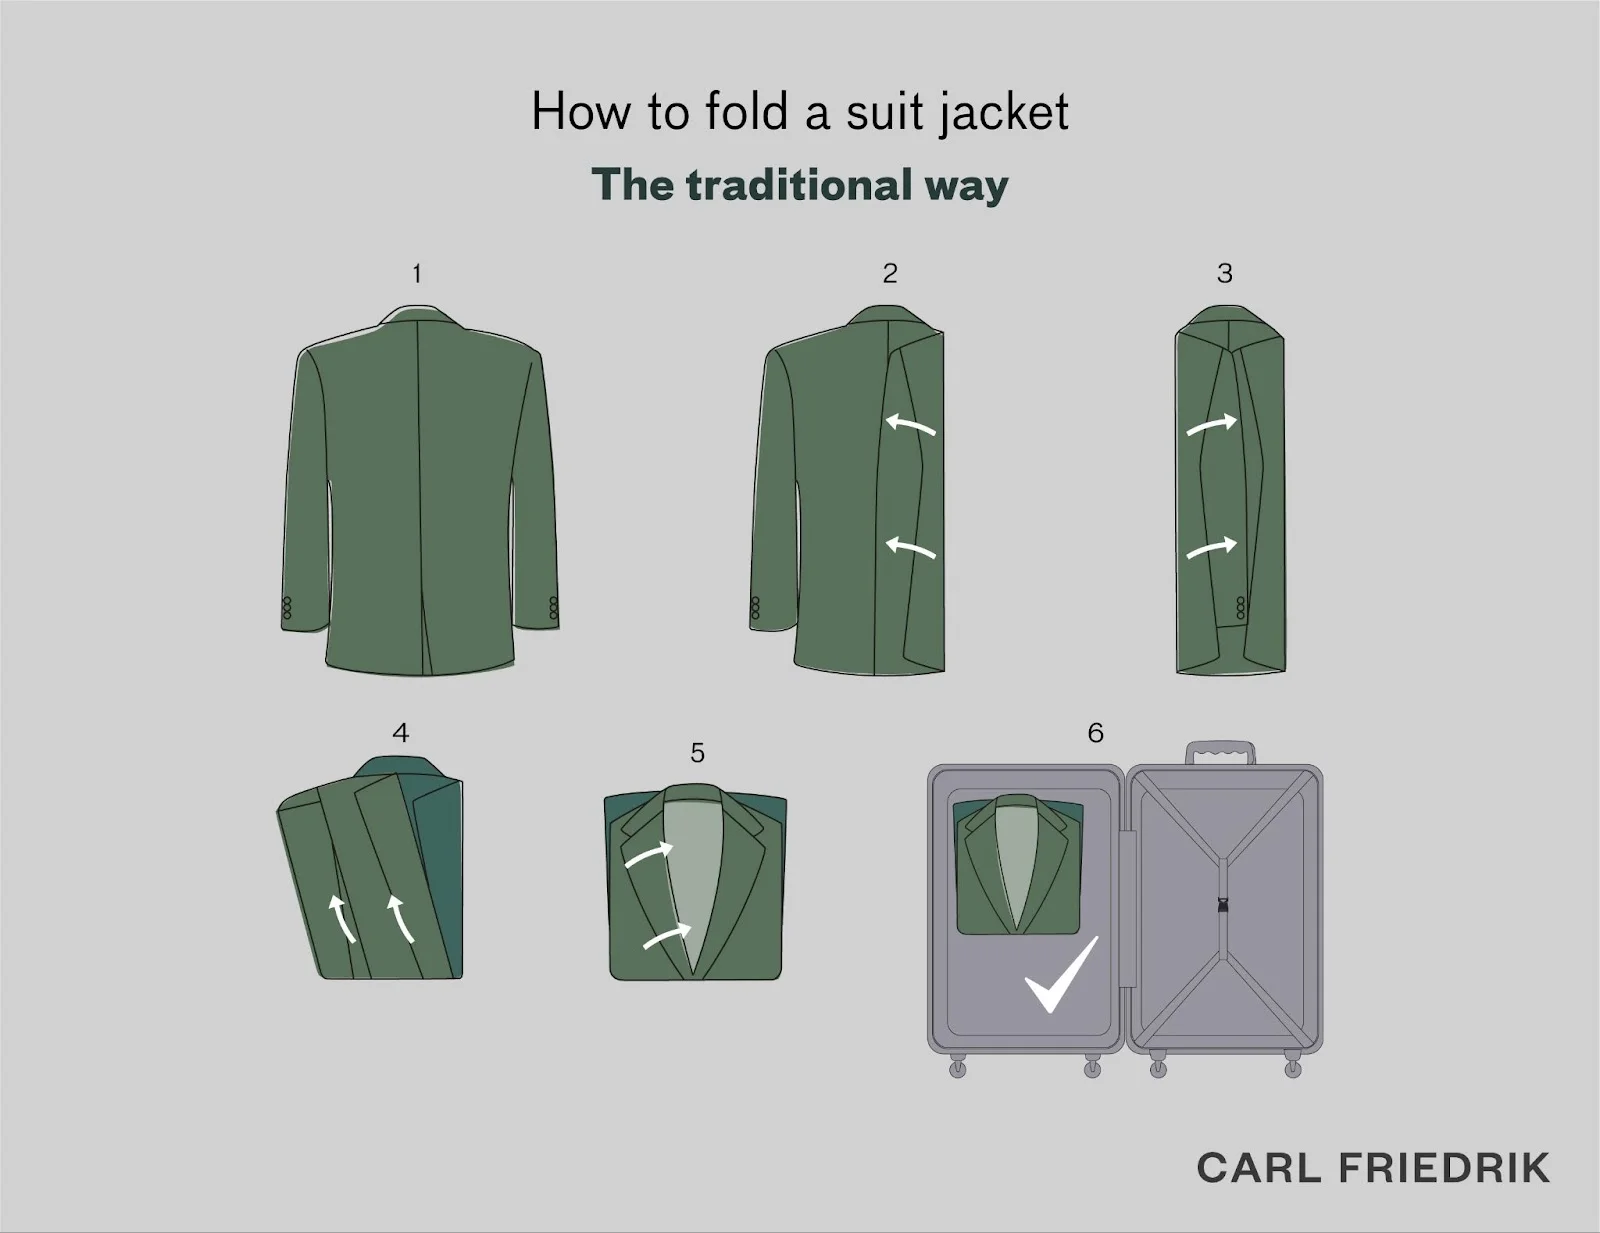 picture is showing as to how to fold a suit jacket in the traditional way for placing it in a carry-on luggage for the trip